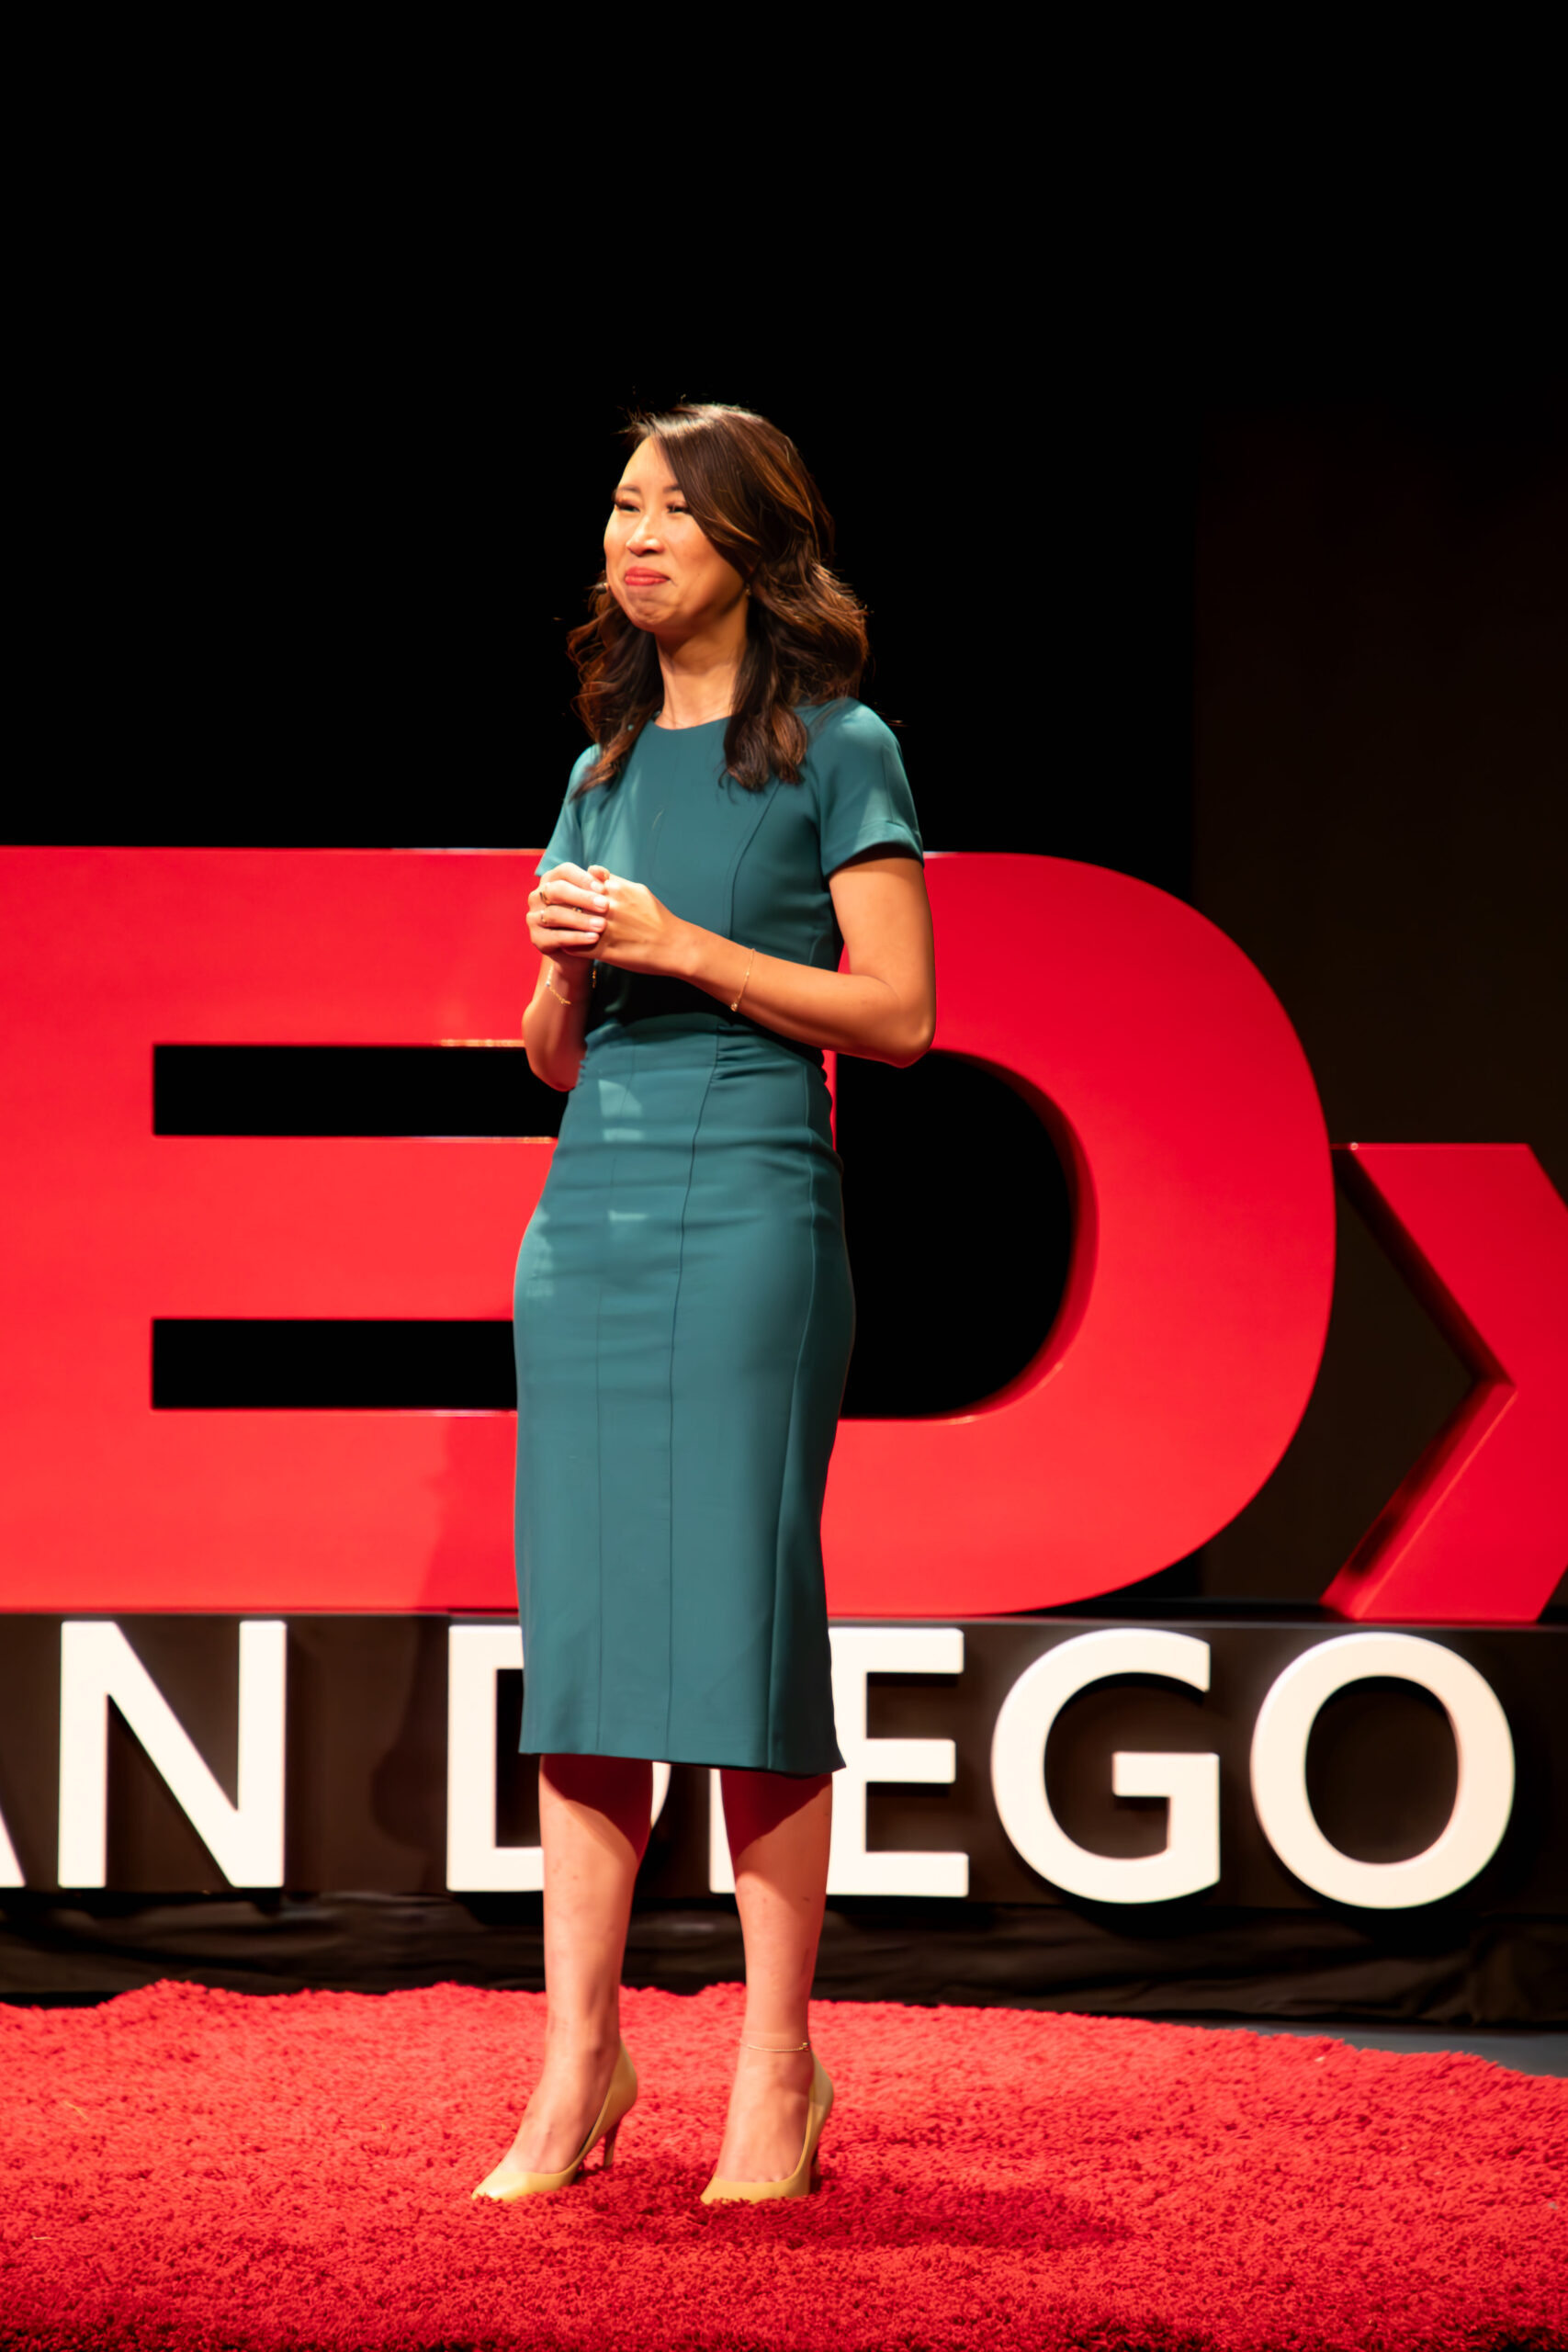 Image of Dr. Jillian Wiggins wearing a teal dress presenting in front of a TEDx background.